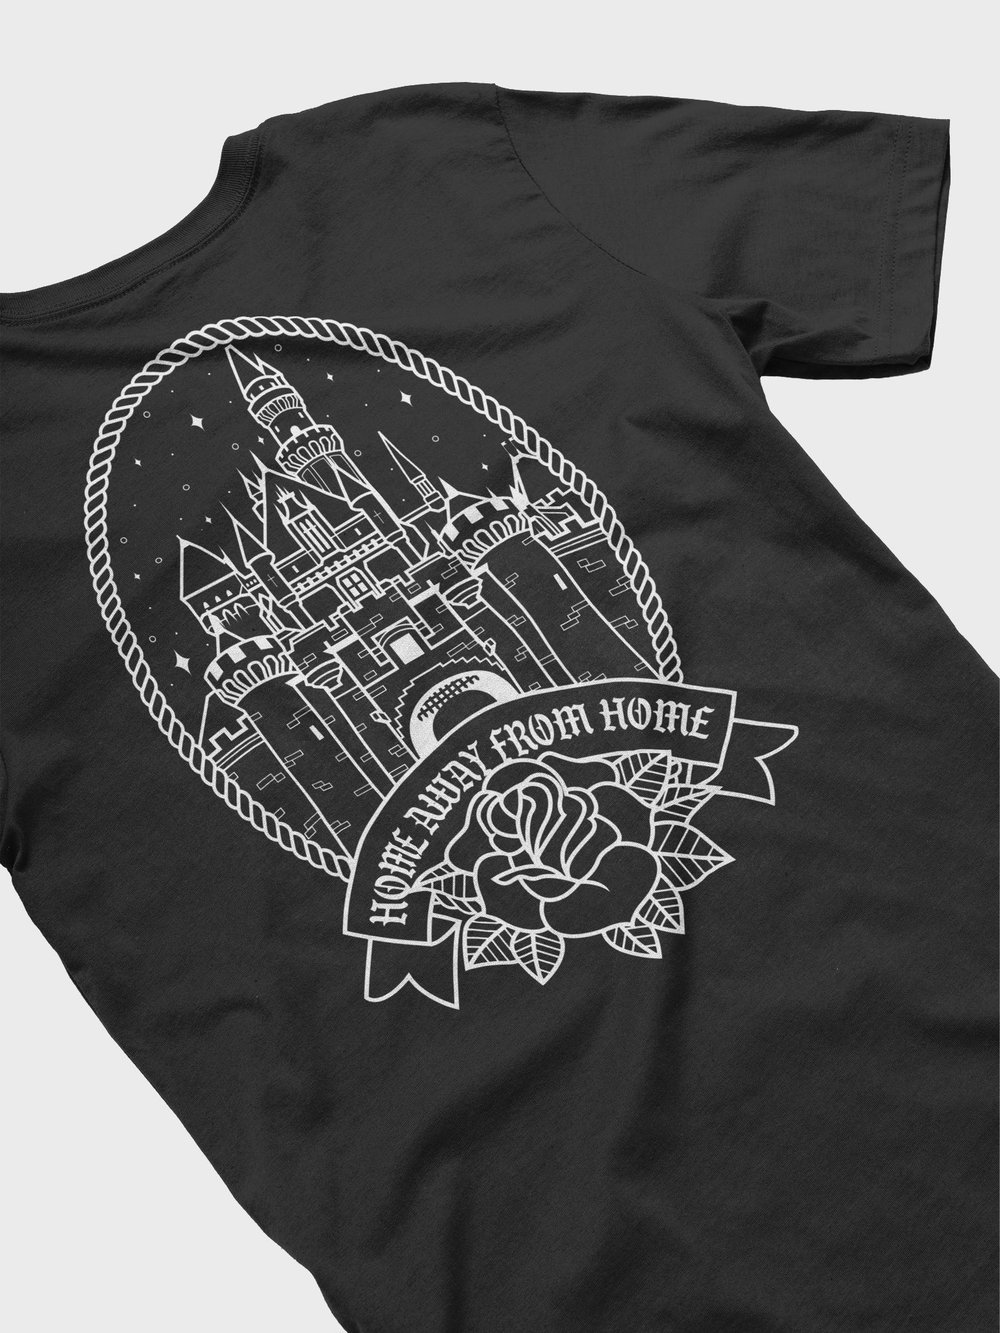 'Happiest Place On Earth' Tee